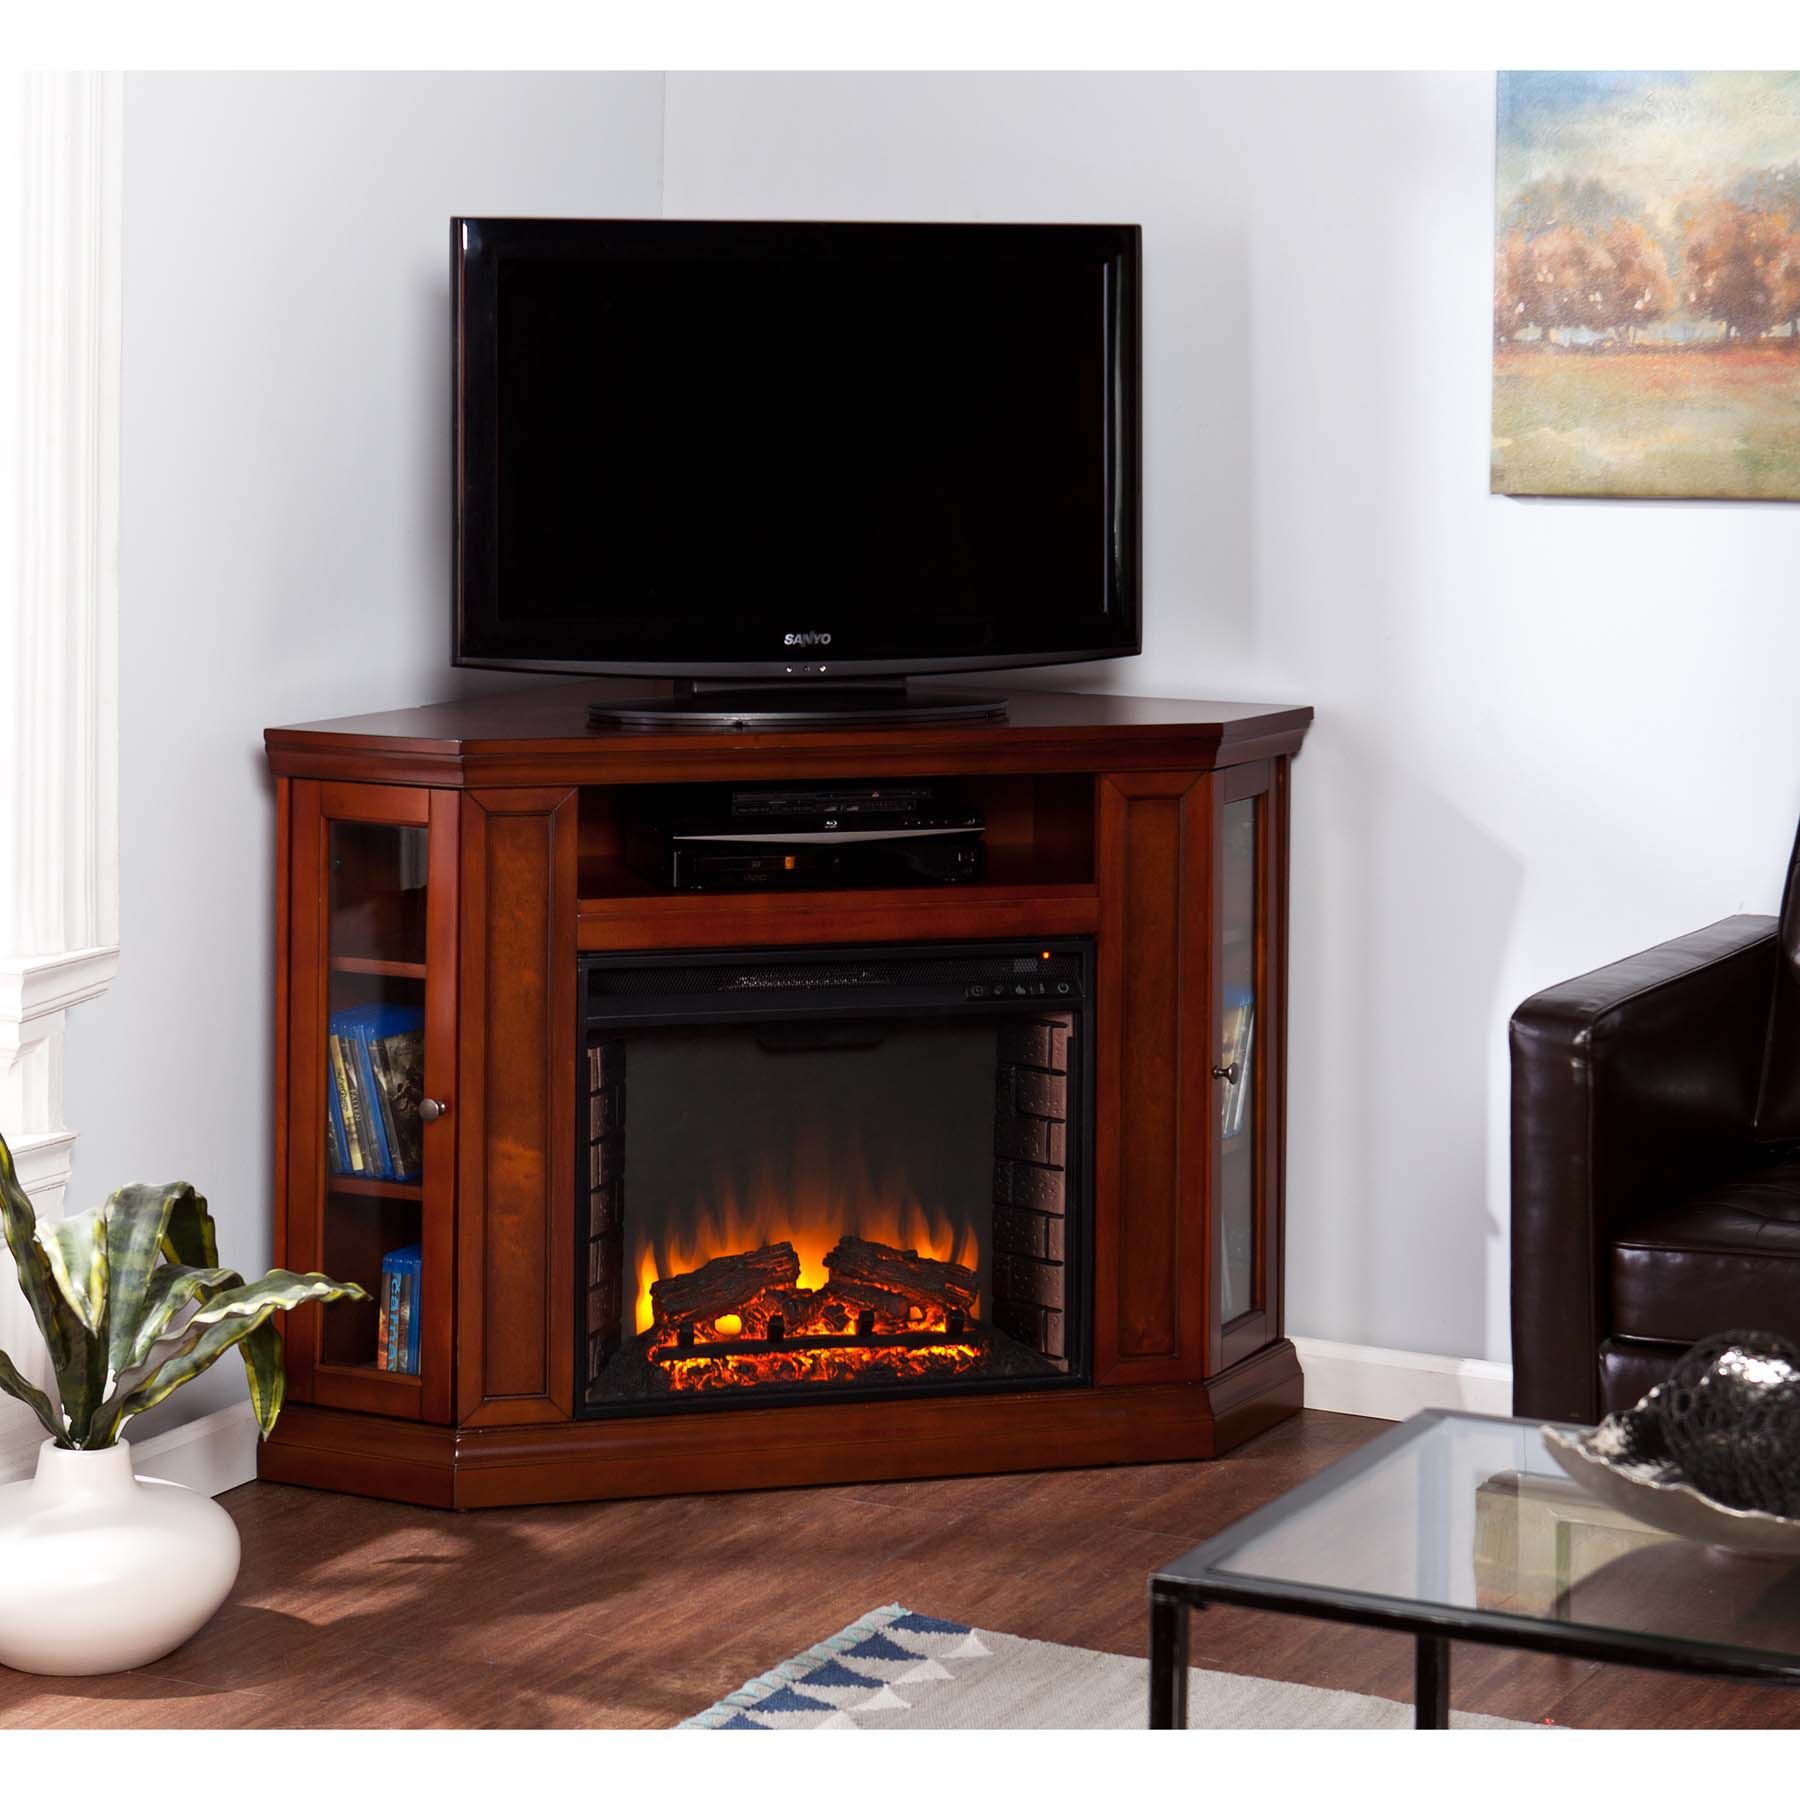 Fireplace Entertainment Center Lowes Inspirational 42 Best Rustic Fireplace Images